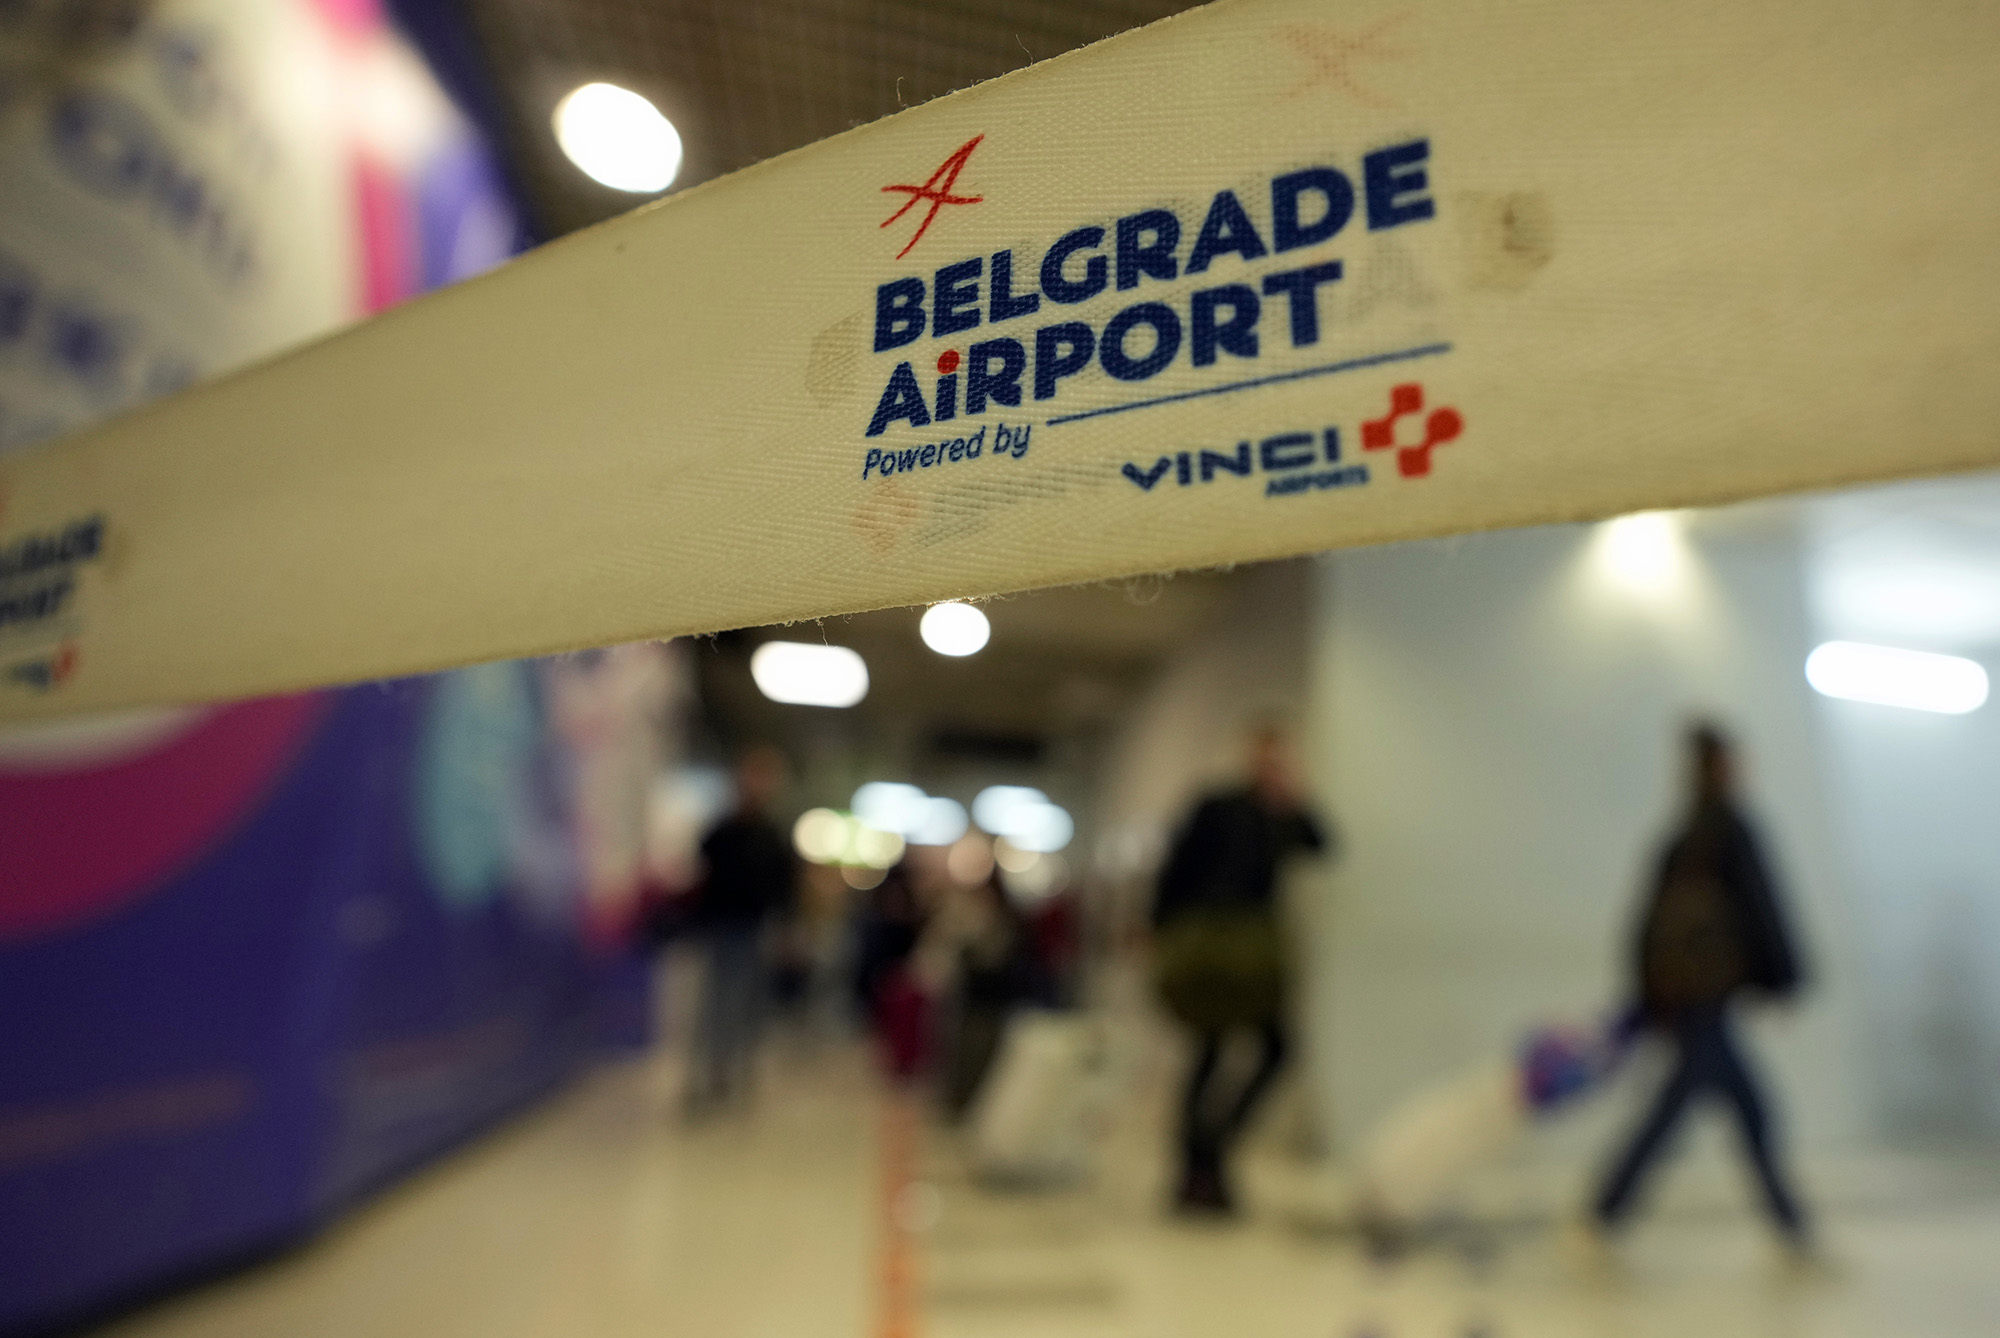 Passengers from the Moscow-Belgrade flight, operated by Air Serbia, pass through the airport building in Belgrade, Serbia on Wednesday, Sept. 21.